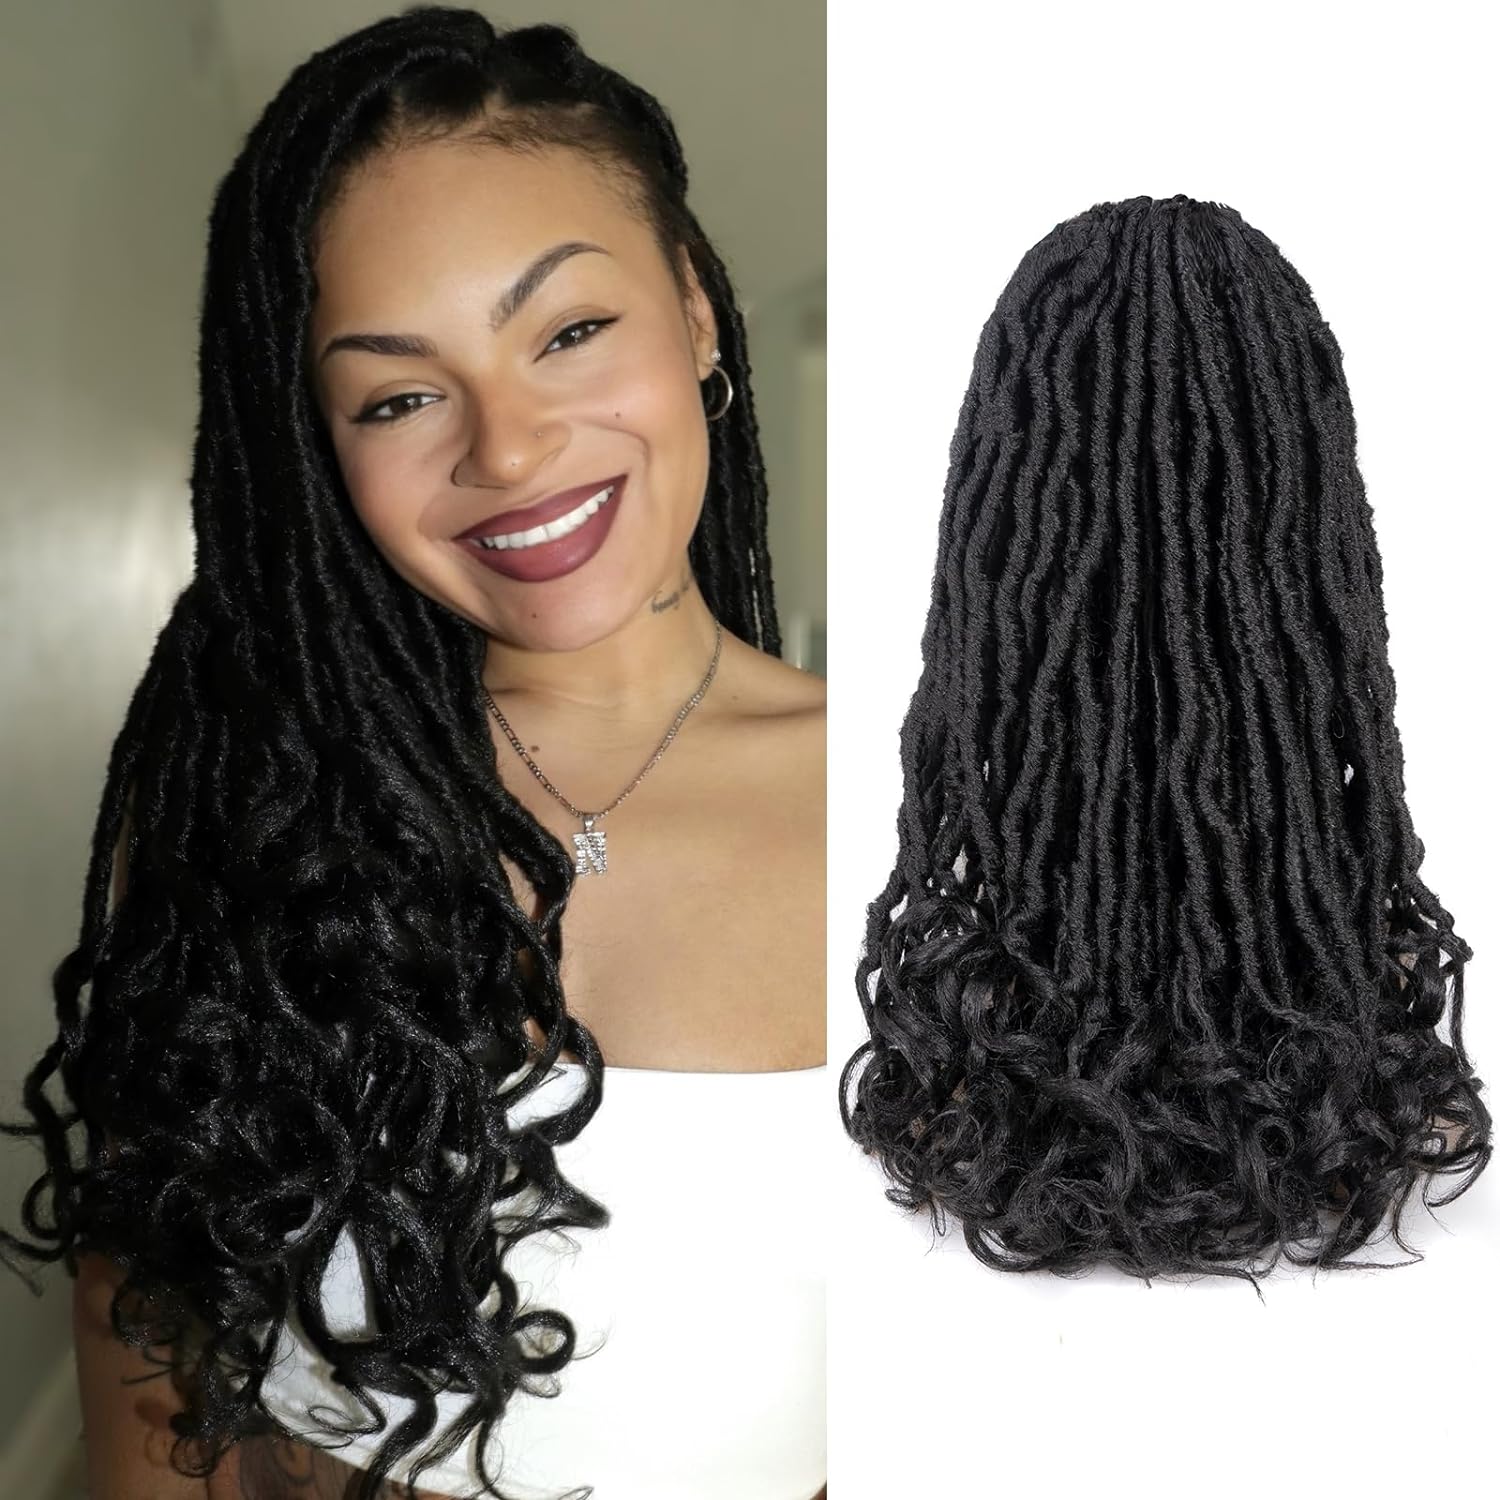 FAST SHIPPING 3-5 DAY FC | Toyotress French Curl Locs Crochet Hair Curly Faux Locs 8 Packs Black Pre-Looped Crochet Hair with Curly ends Crochet Hair with Soft Curly Wave Ends Hair Extensions